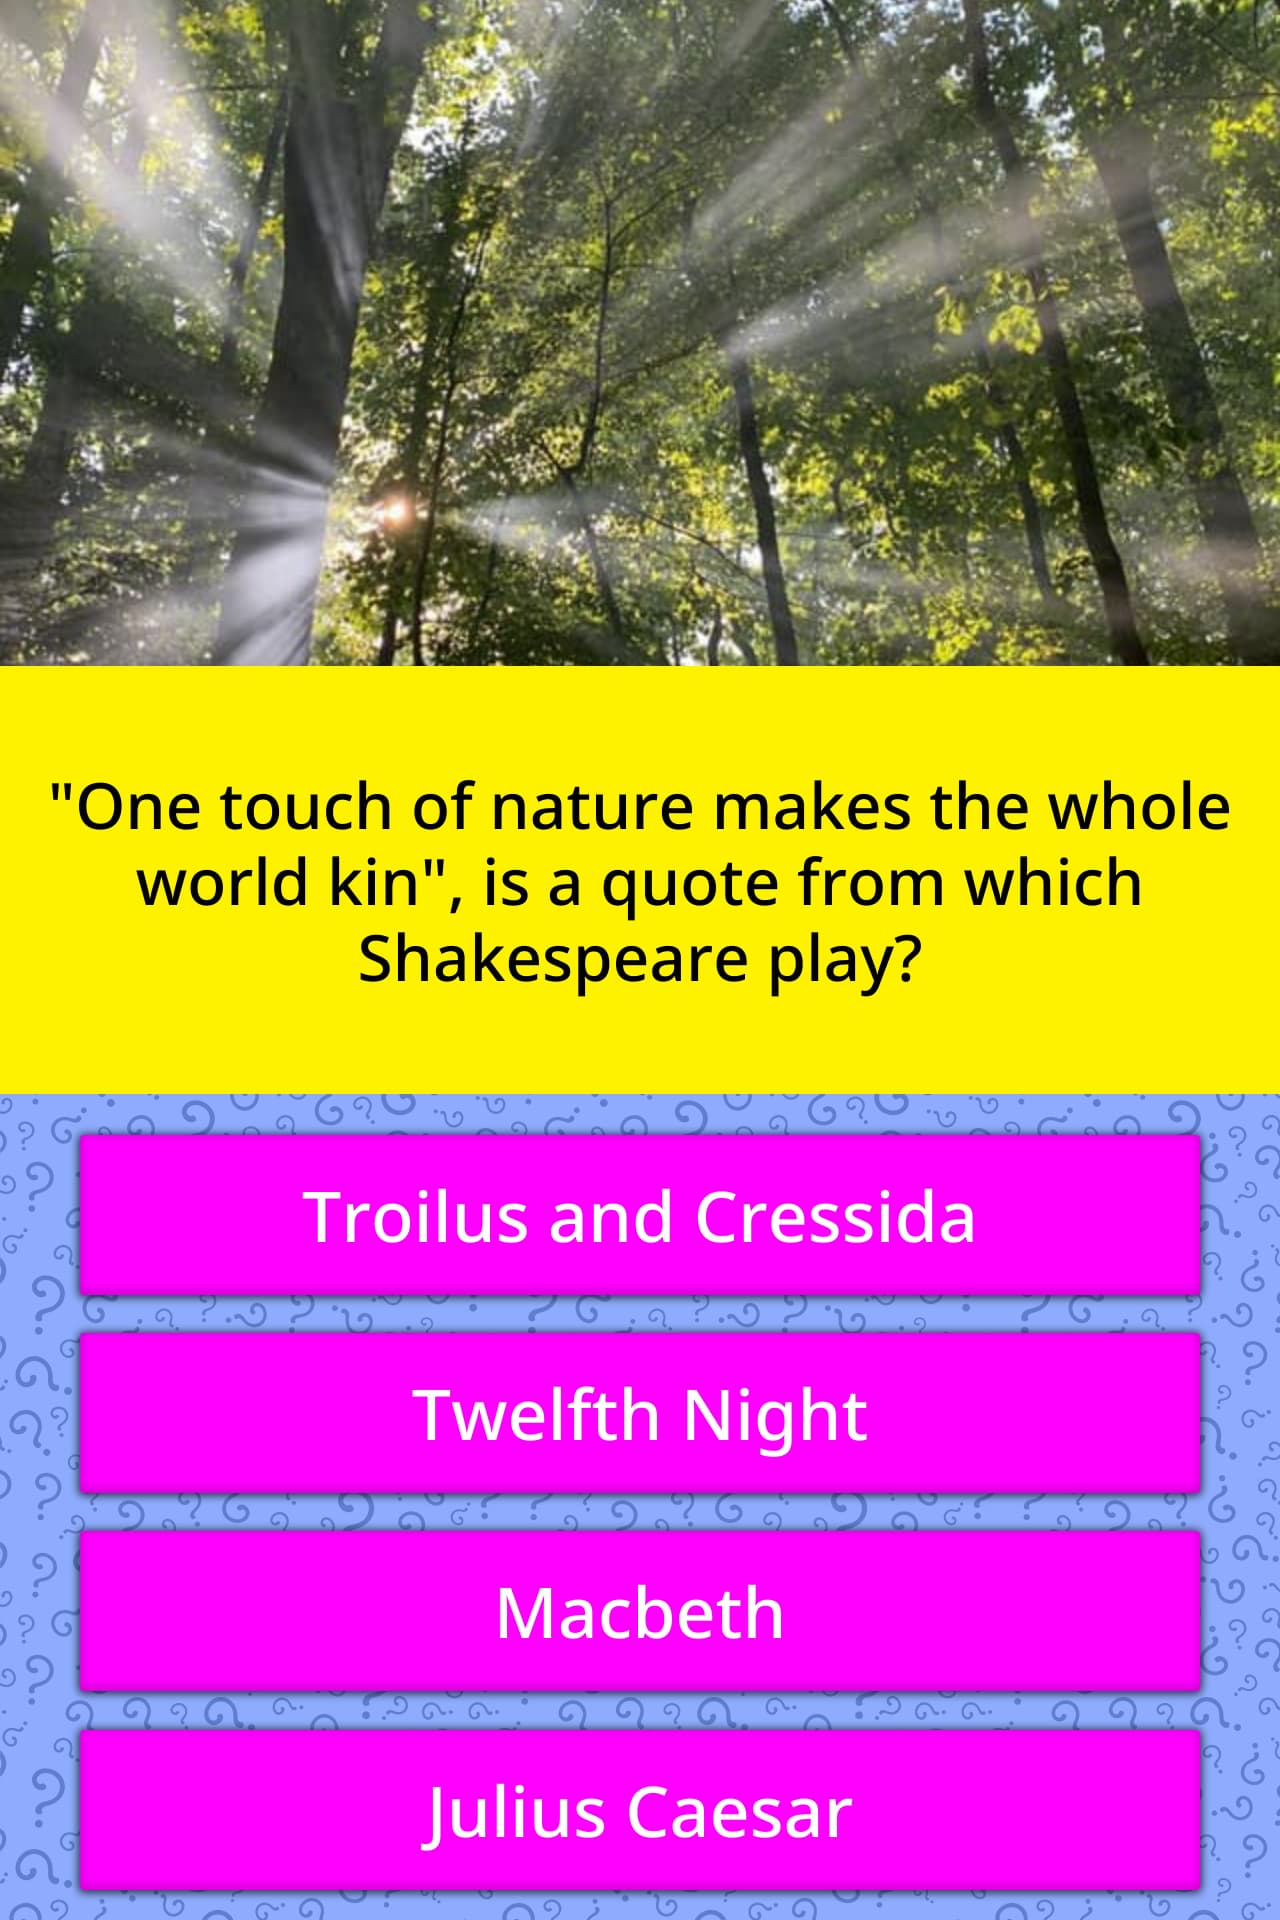 One touch of nature makes whole... | Answers | QuizzClub